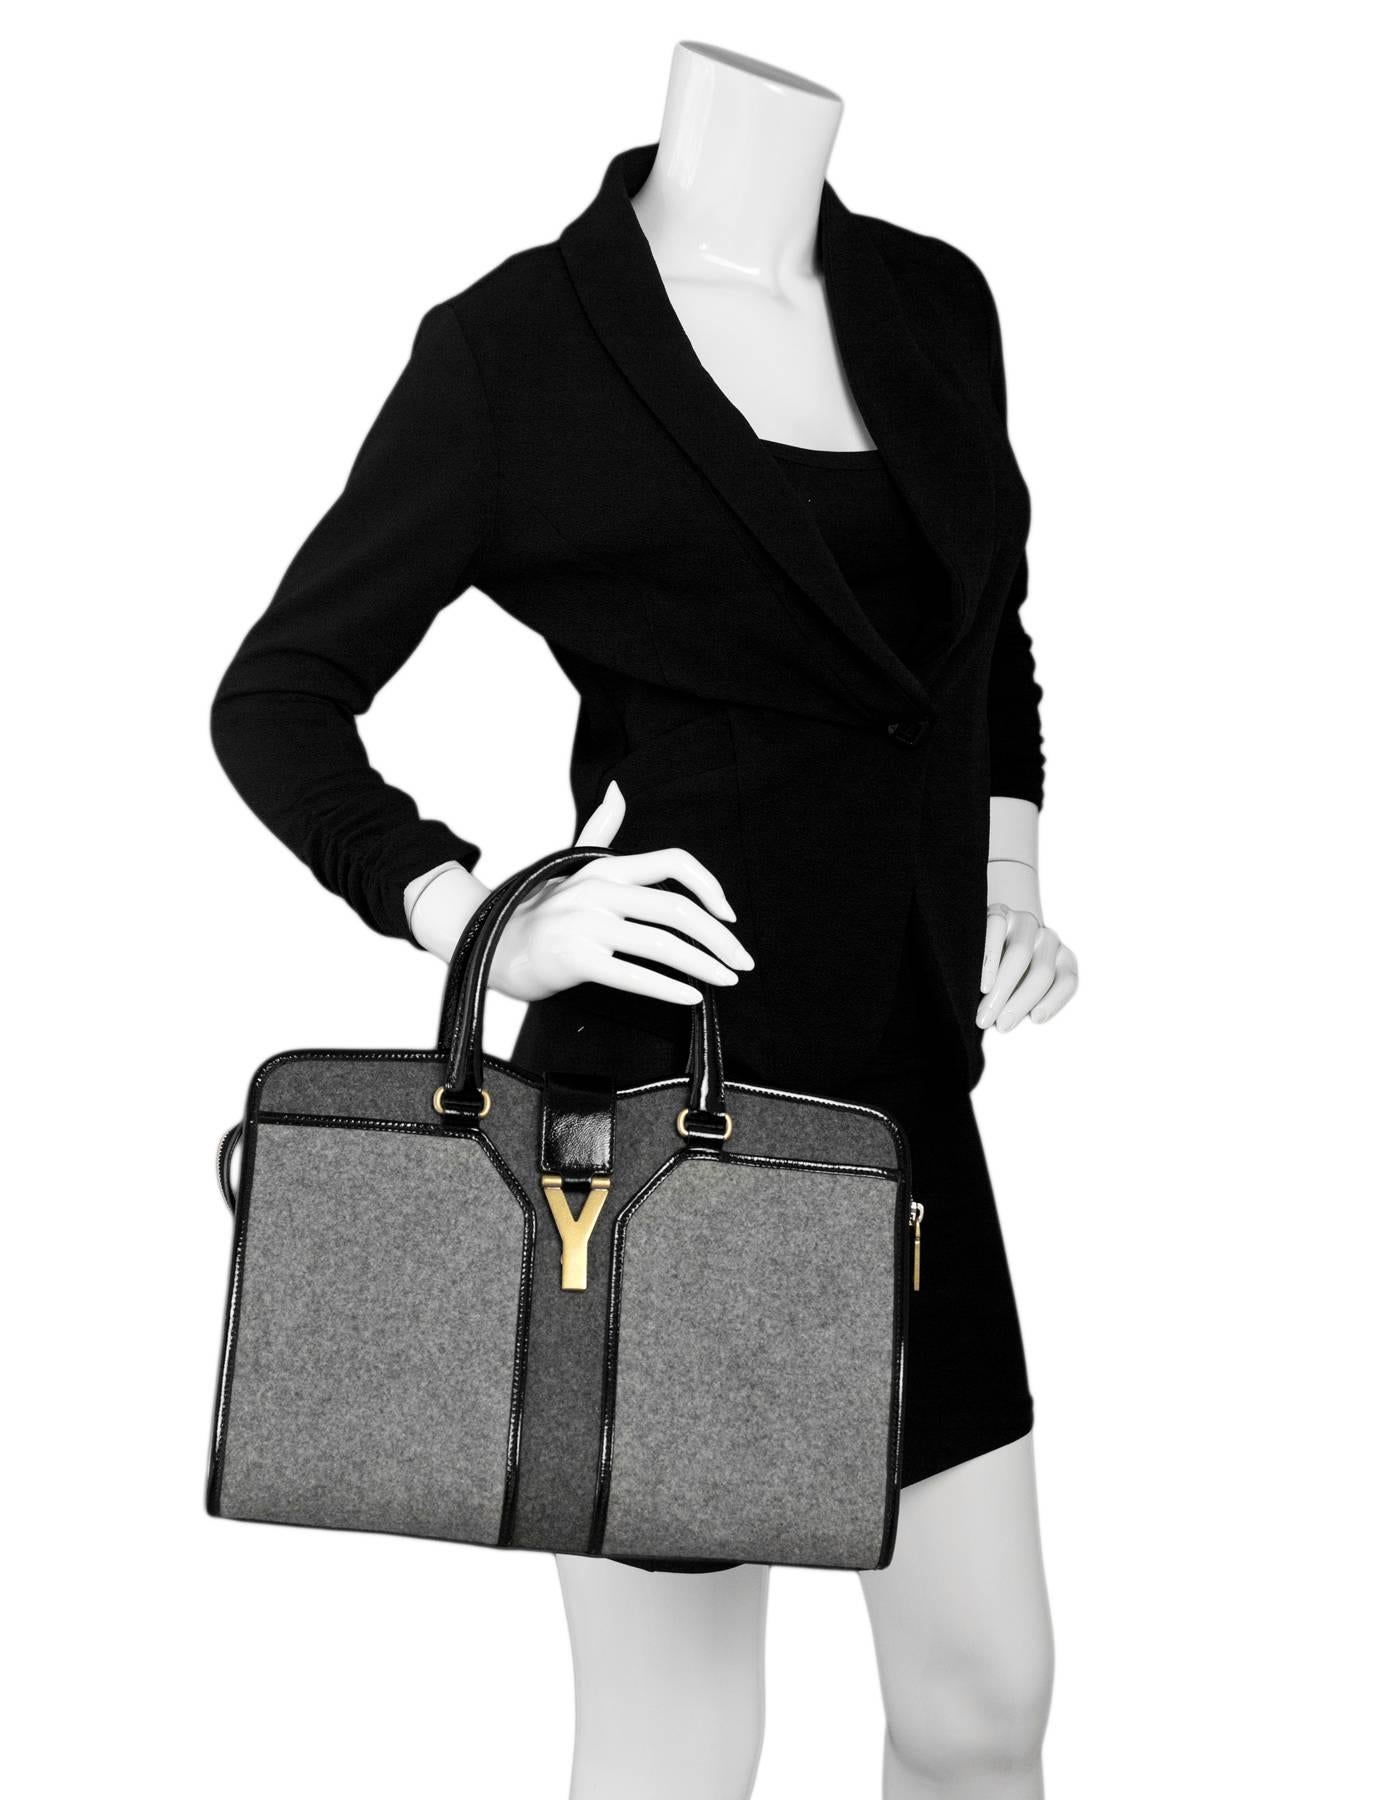 Yves Saint Laurent Cabas ChYc Medium Wool-Felt and Patent Leather Tote

Made In: Italy
Color: Grey, black
Hardware: Goldtone
Materials: wool-felt, patent leather, metal
Lining: Black textile
Closure/Opening: Double zip top with center Y